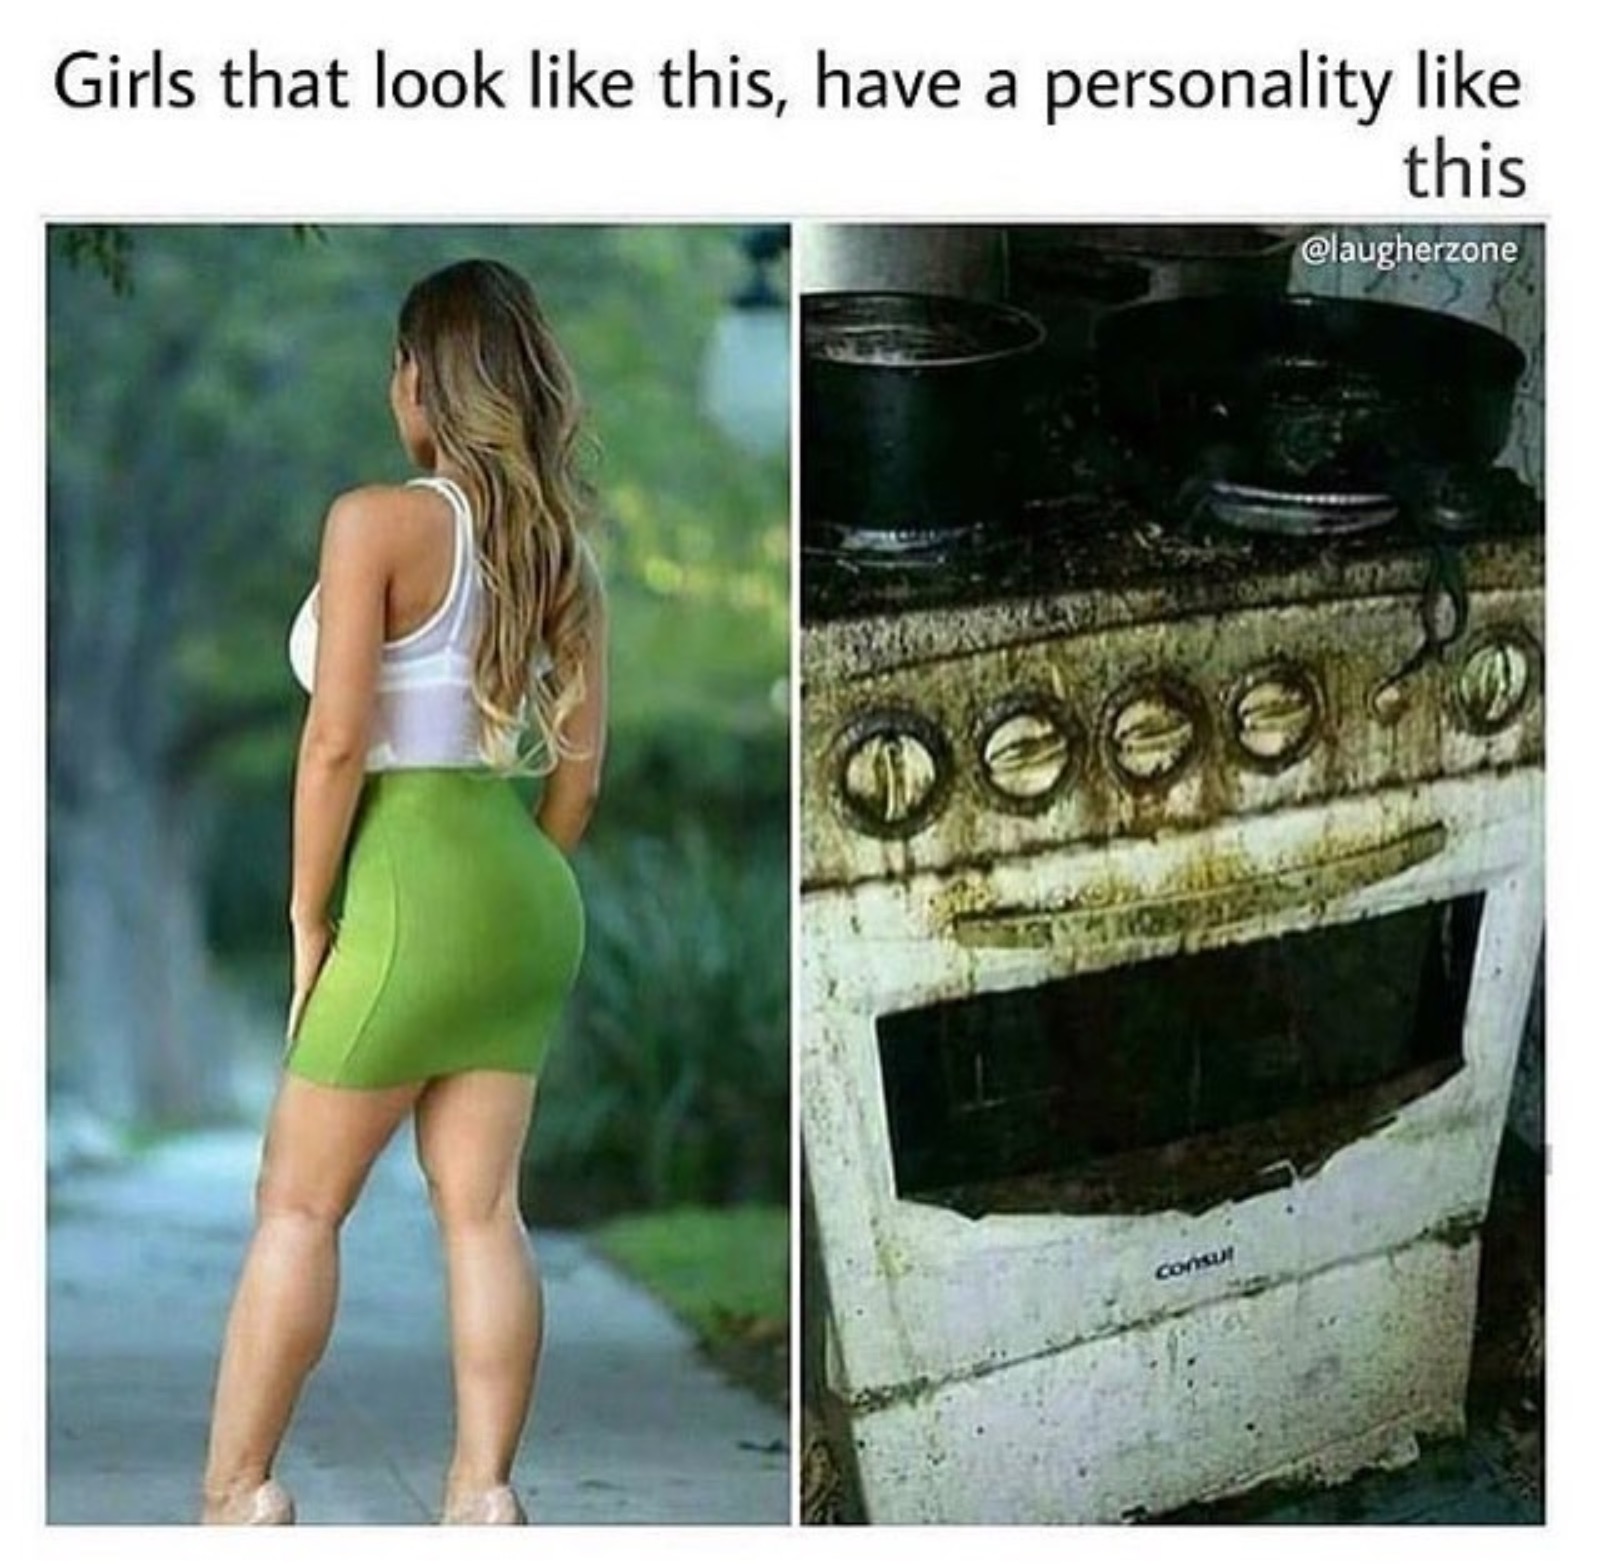 Dank meme of girls who look hot have a personality like this disgusting oven.